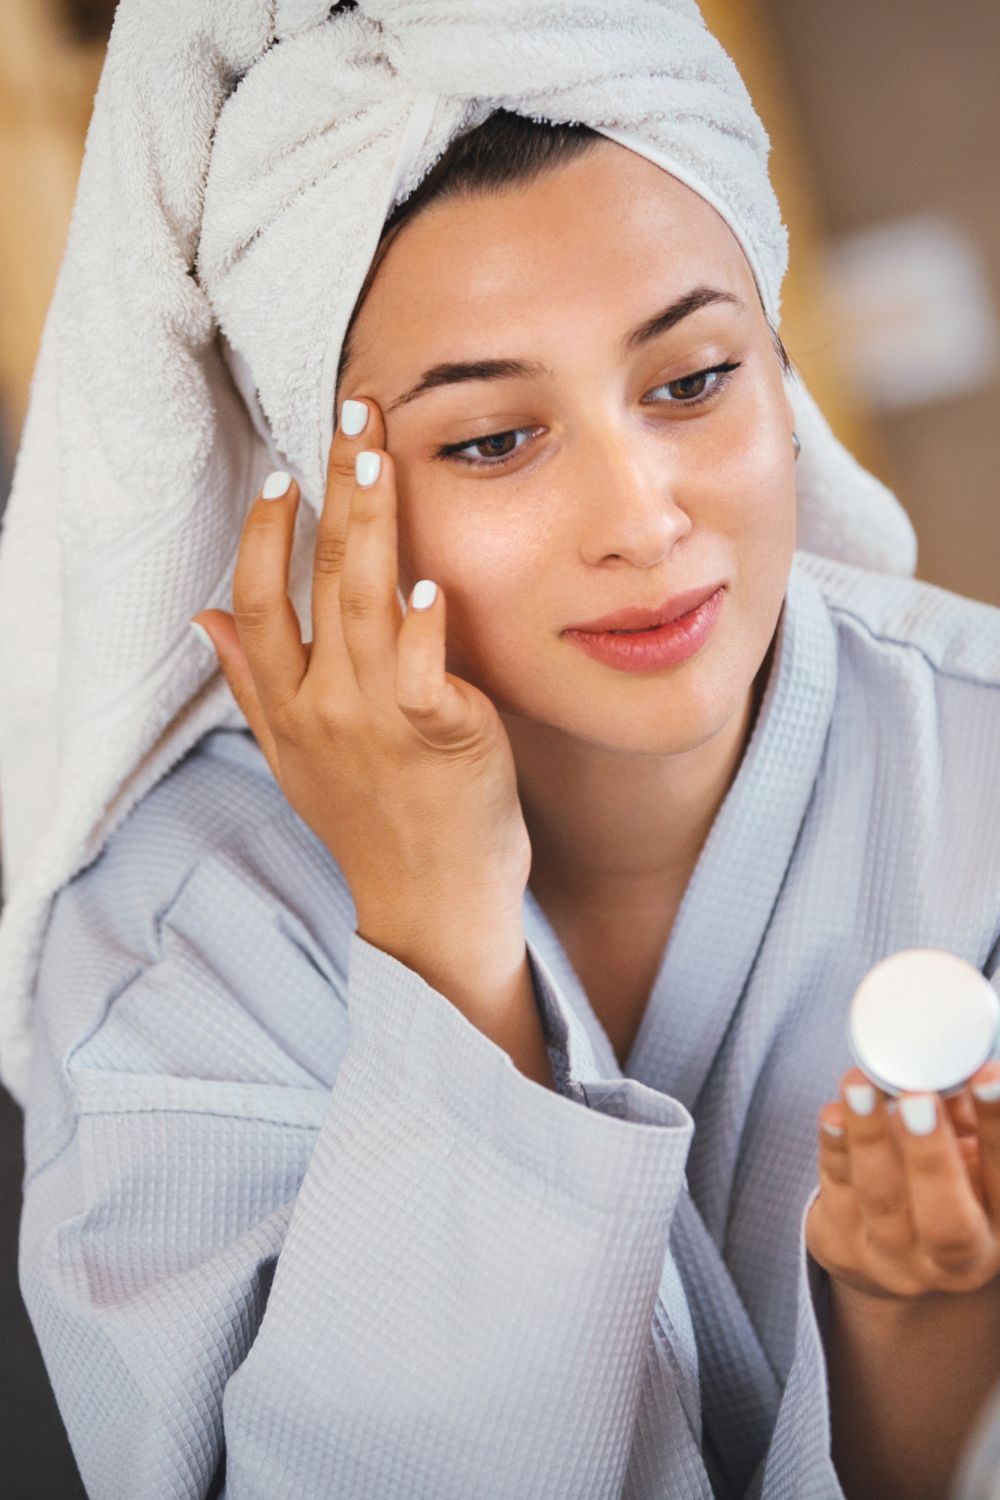 How to Make Your Skincare Routine More Manageable